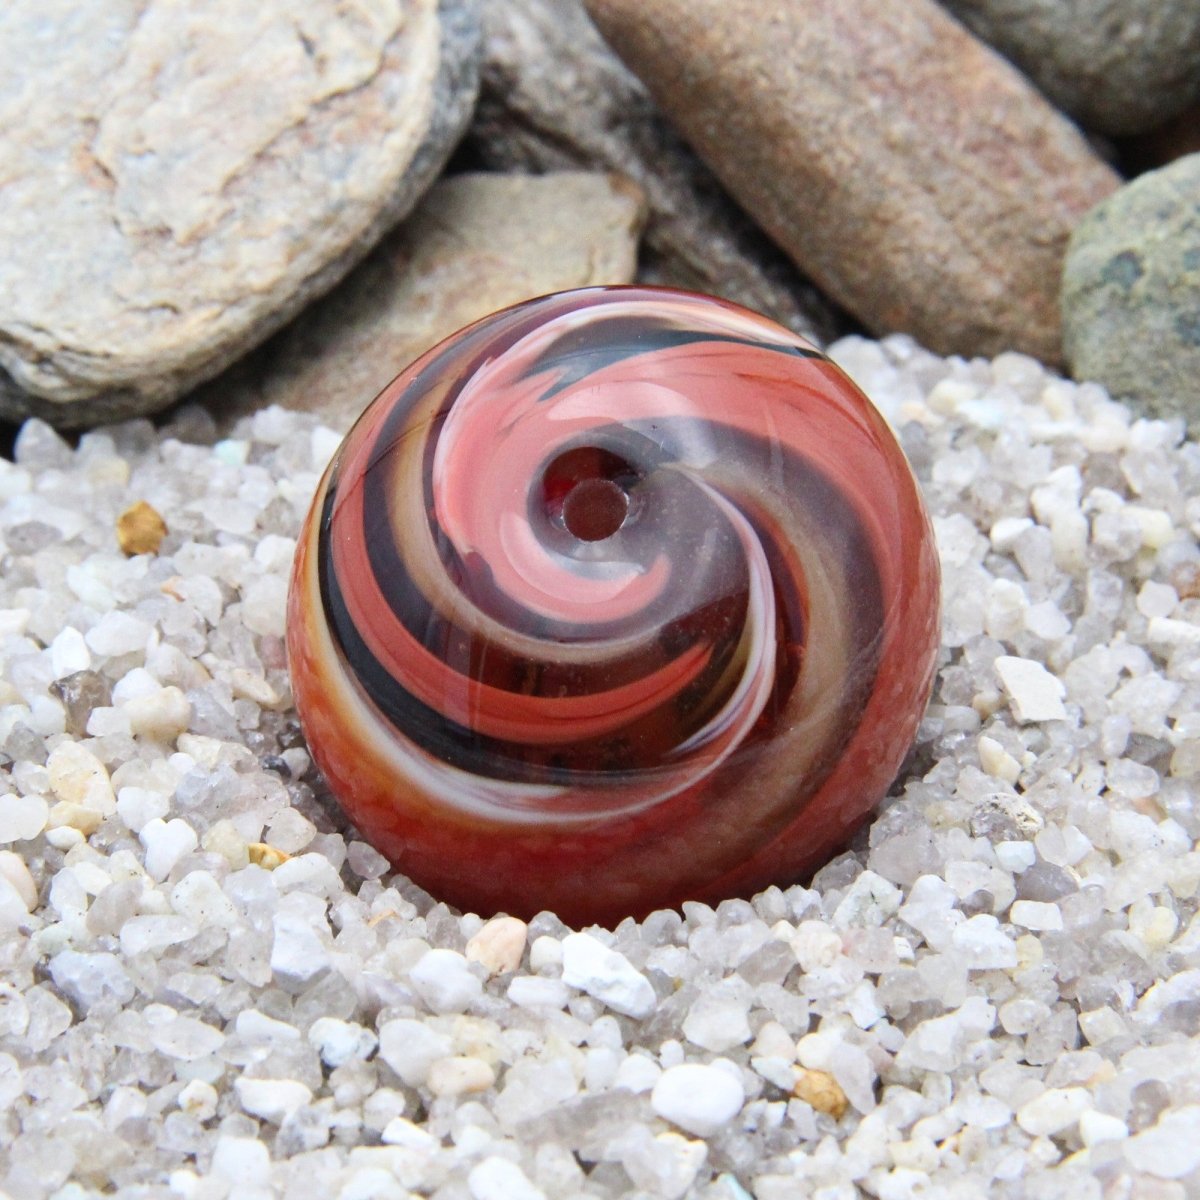 Red and Orange Striped Statement Bead - Handmade Glass Lampwork, Unique Focal Bead for Pendant, Suncatcher, or Home Decorating